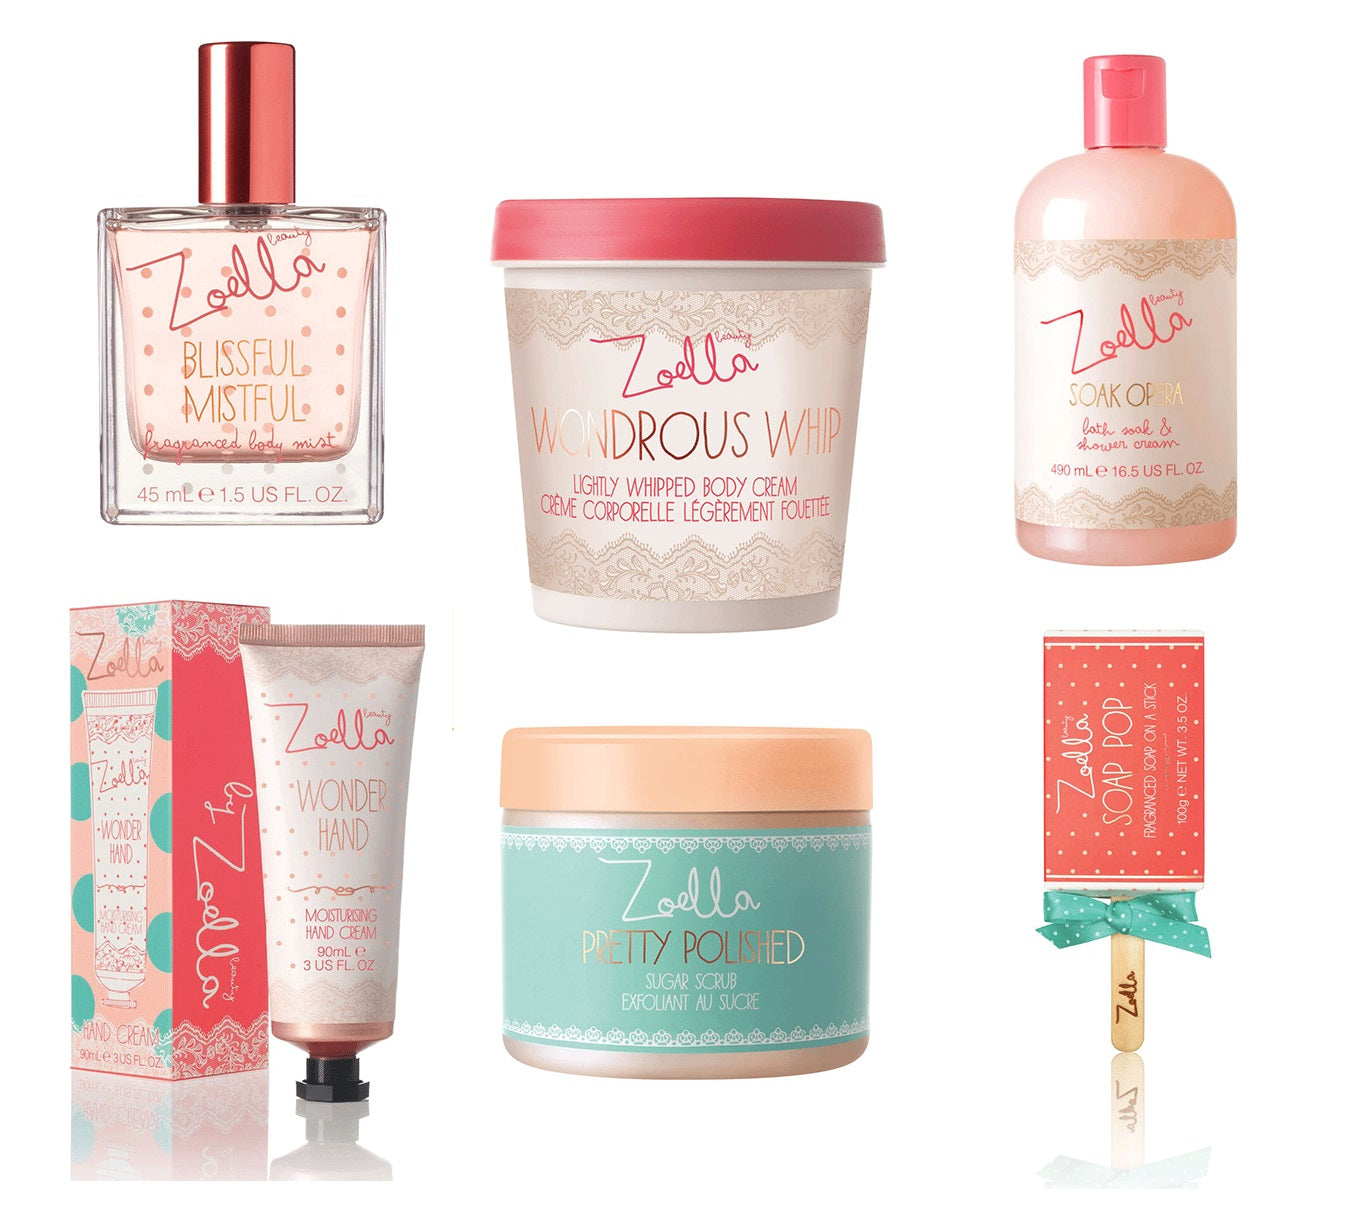 Review, Photos, Skincare Trend 2017, 2018: Zoella Collection at Target, Creamy Madly Deeply Body Lotion, Blissful Mistful Fragranced Body Mist